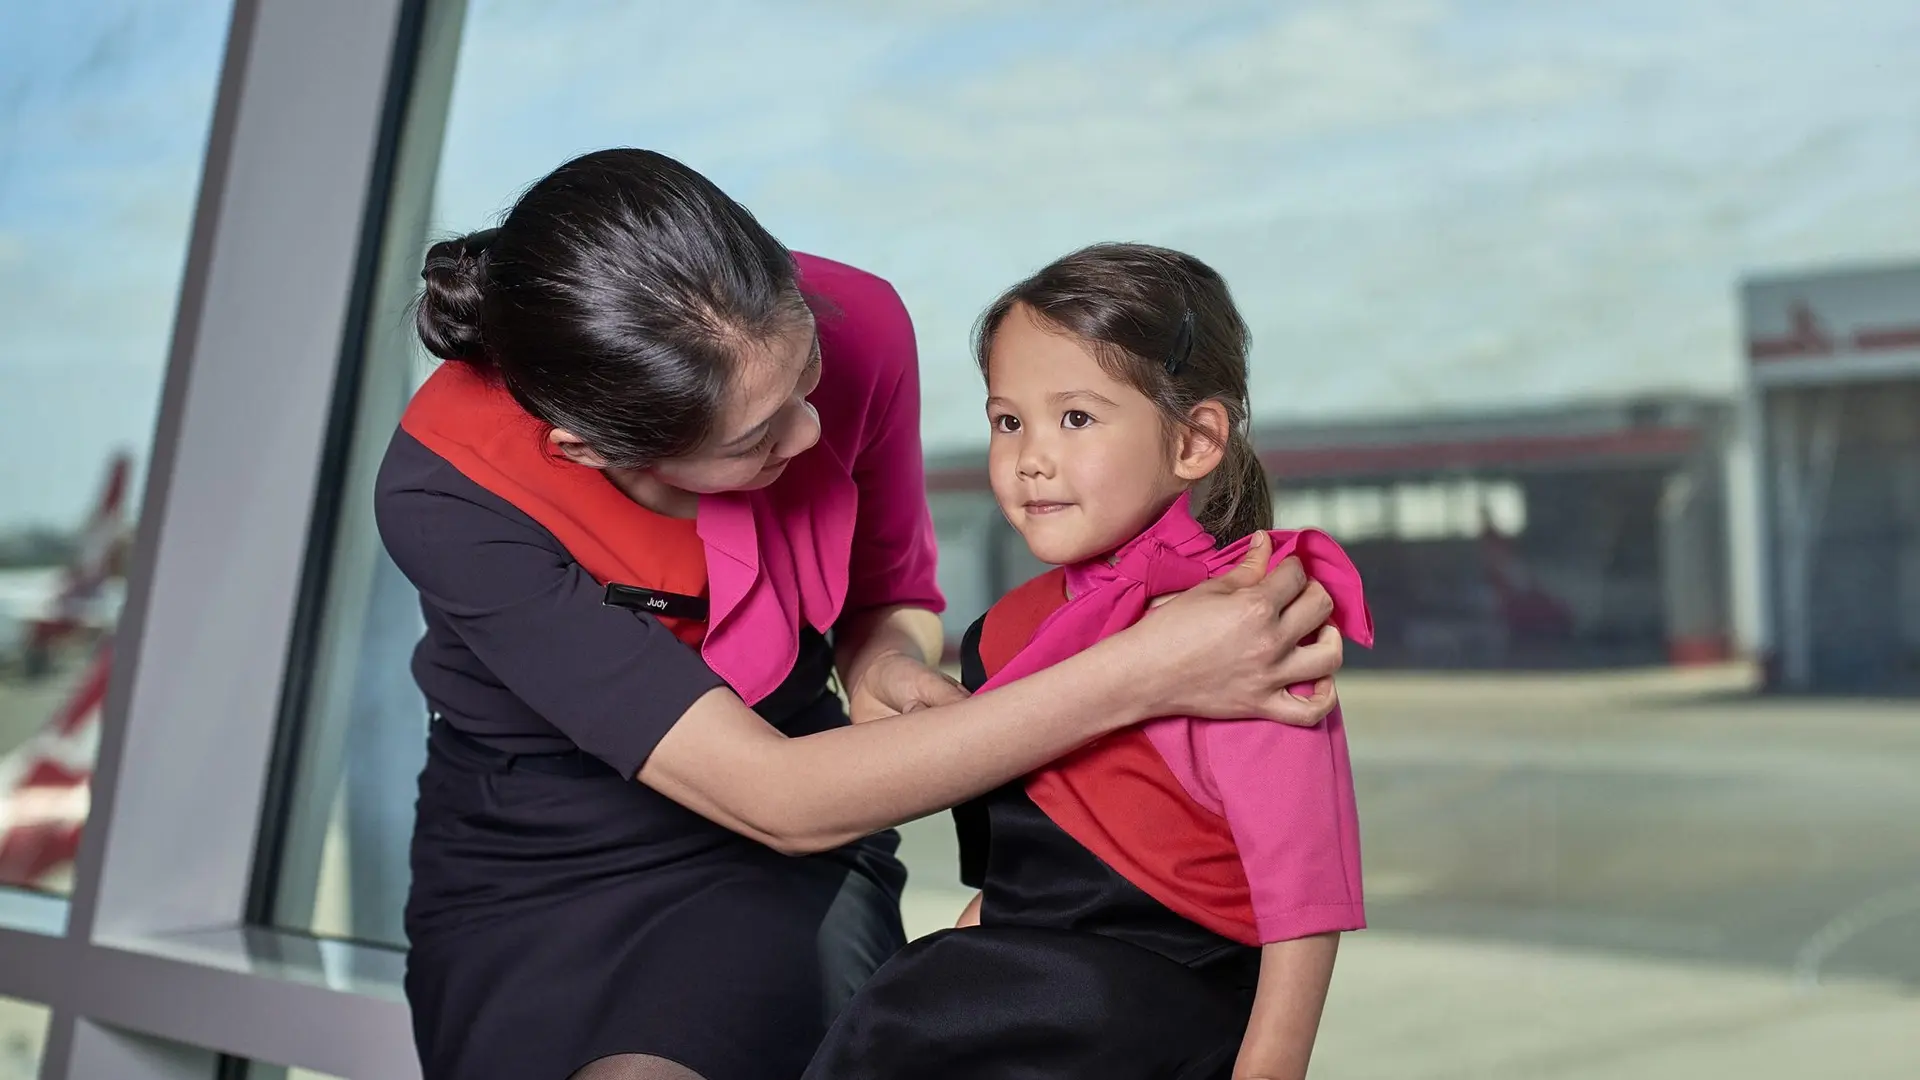 Young girl in pink being taken cared of by a flight attendant before the flight.